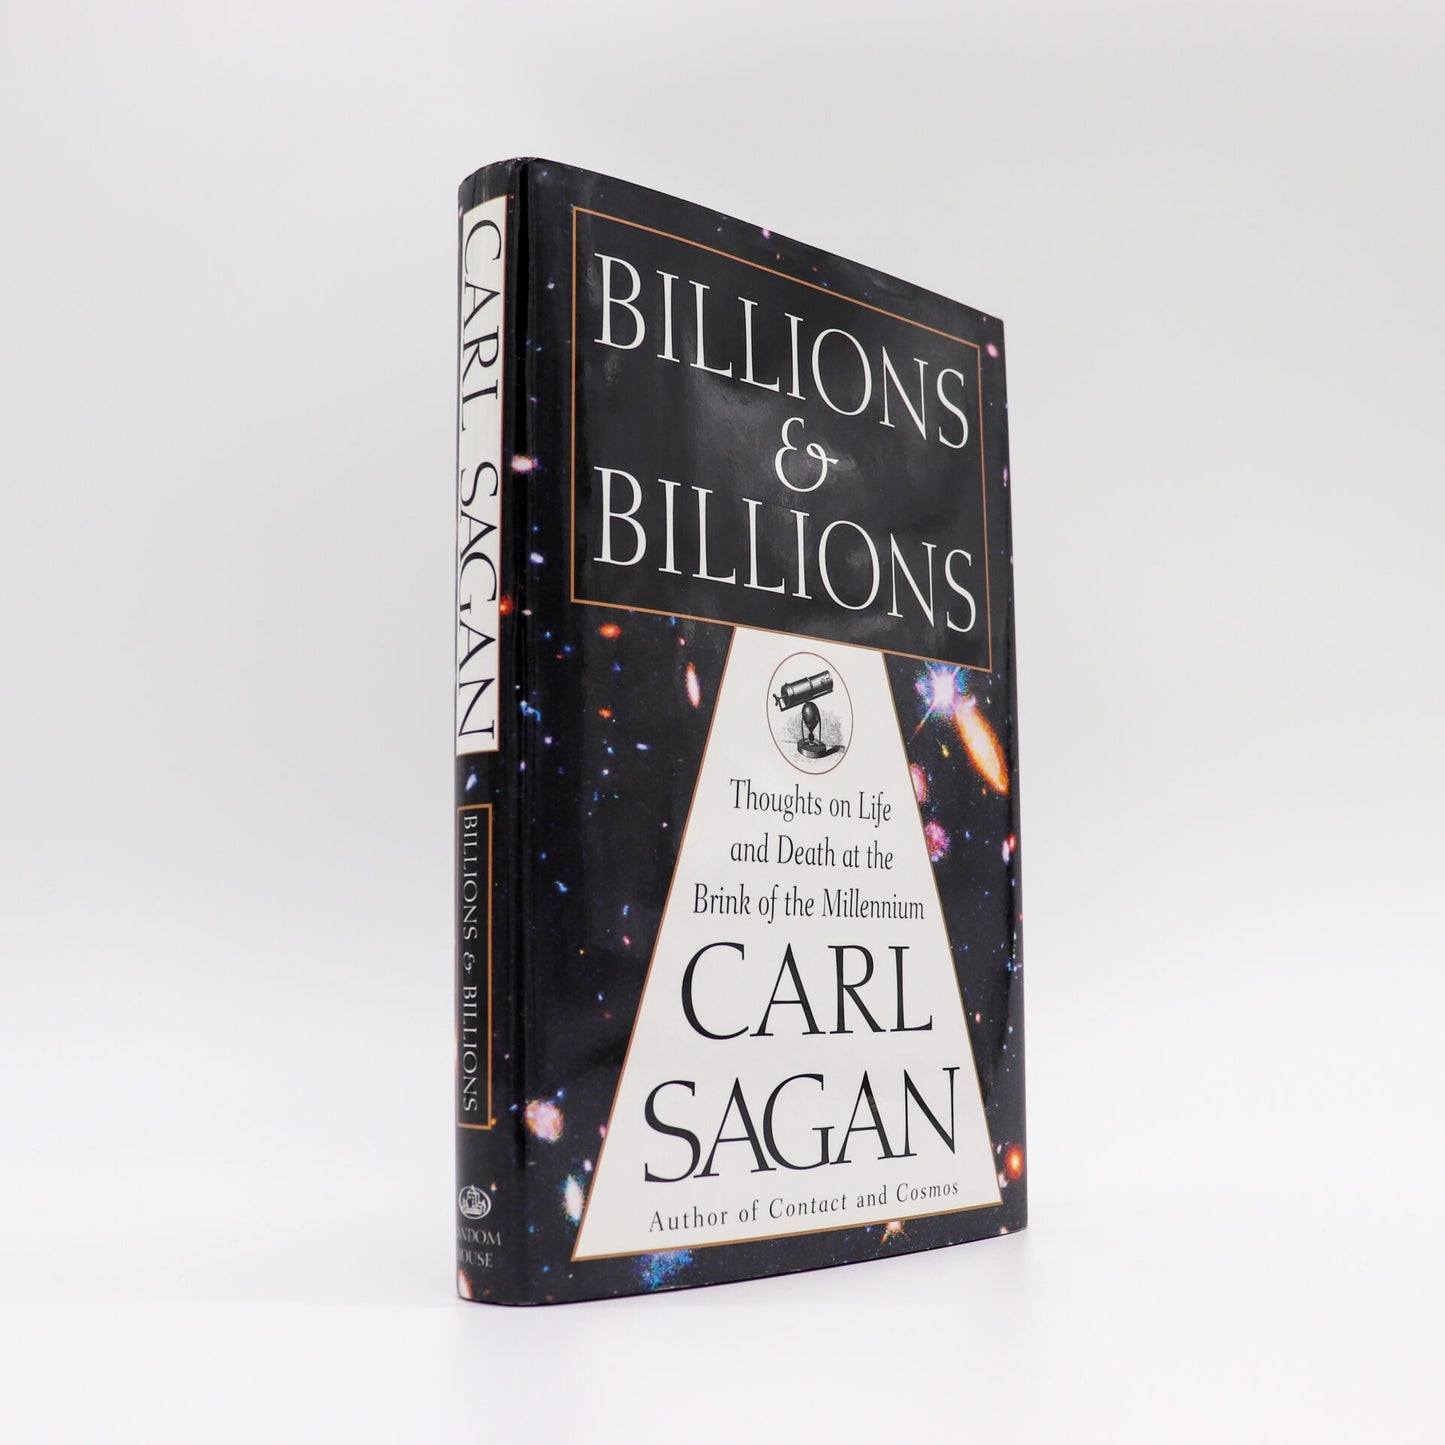 Billions & Billions: Thoughts on Life and Death at the Brink of the Millennium (New)